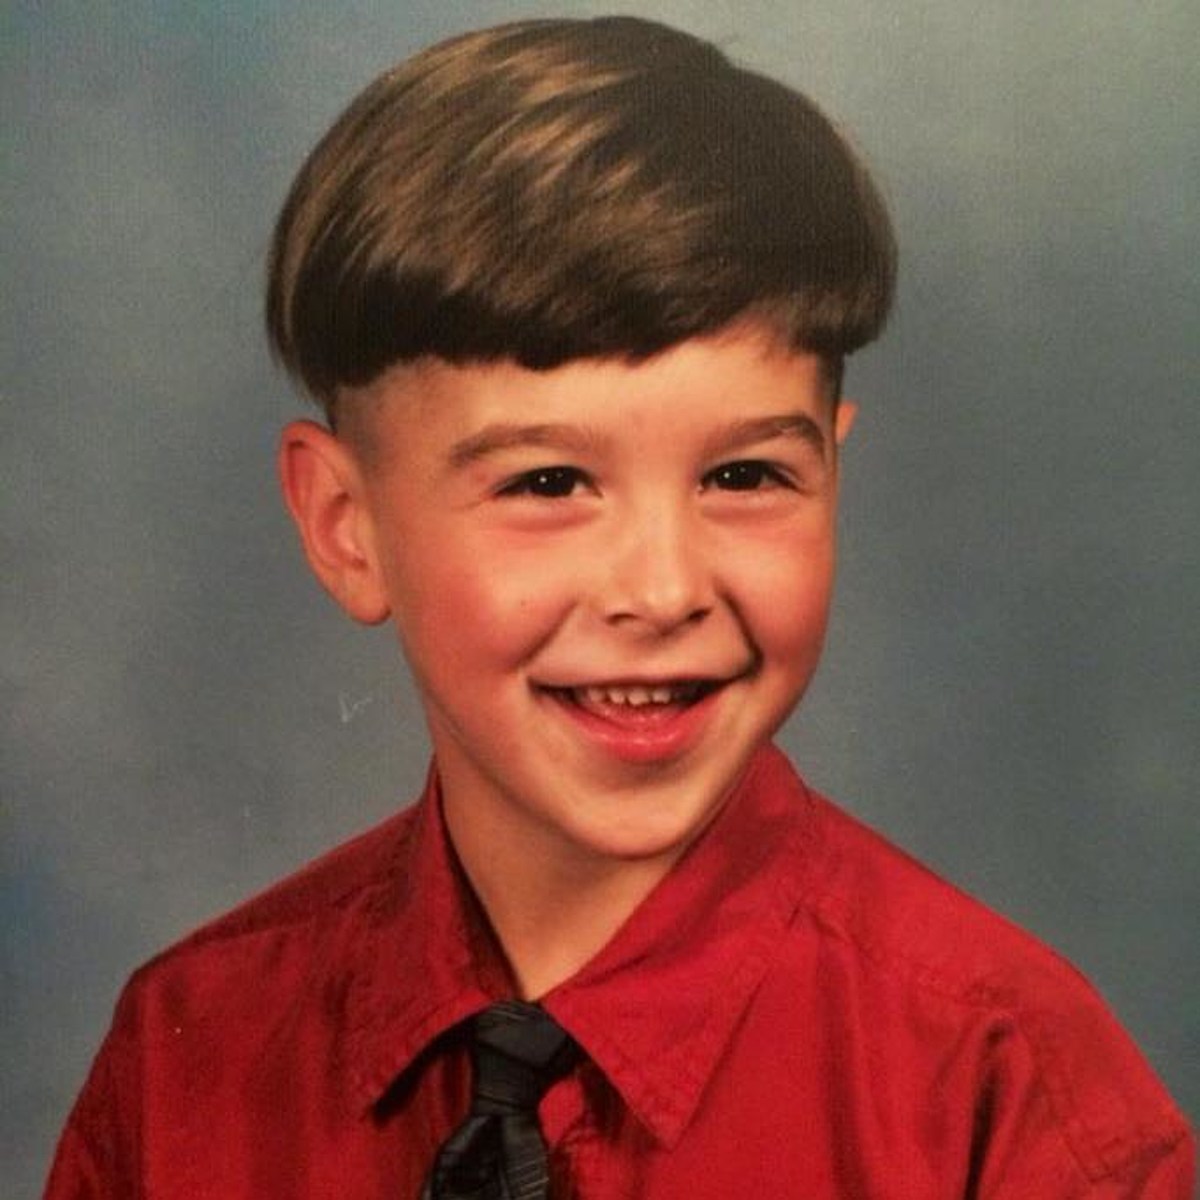 Image of The bowl cut hairstyle from 90s